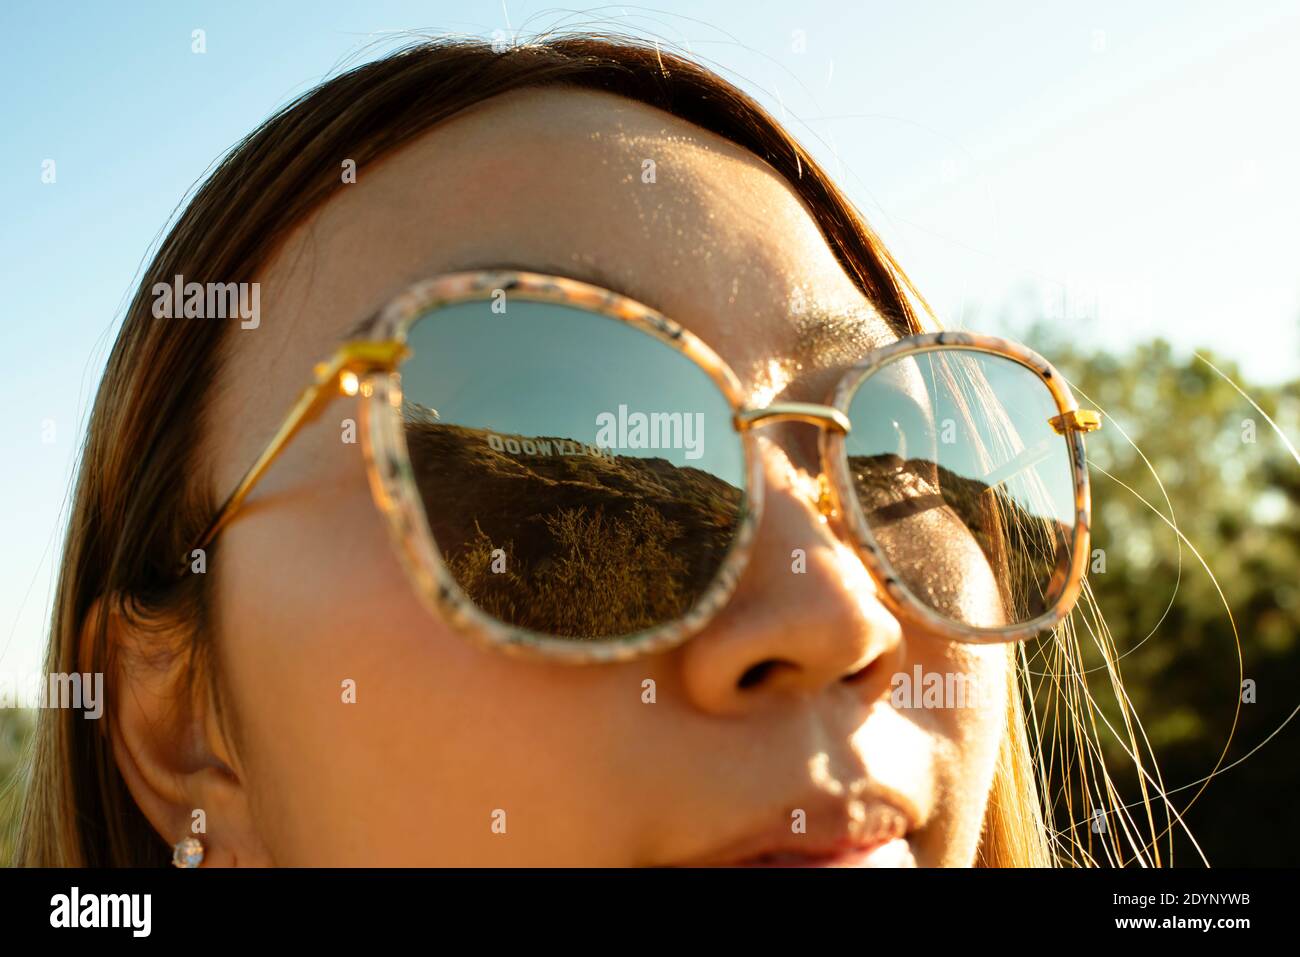 Closeup of girl looking at The Hollywood Sign, reflected in sunglasses. Los Angeles, California, US. Aug 2019 Stock Photo